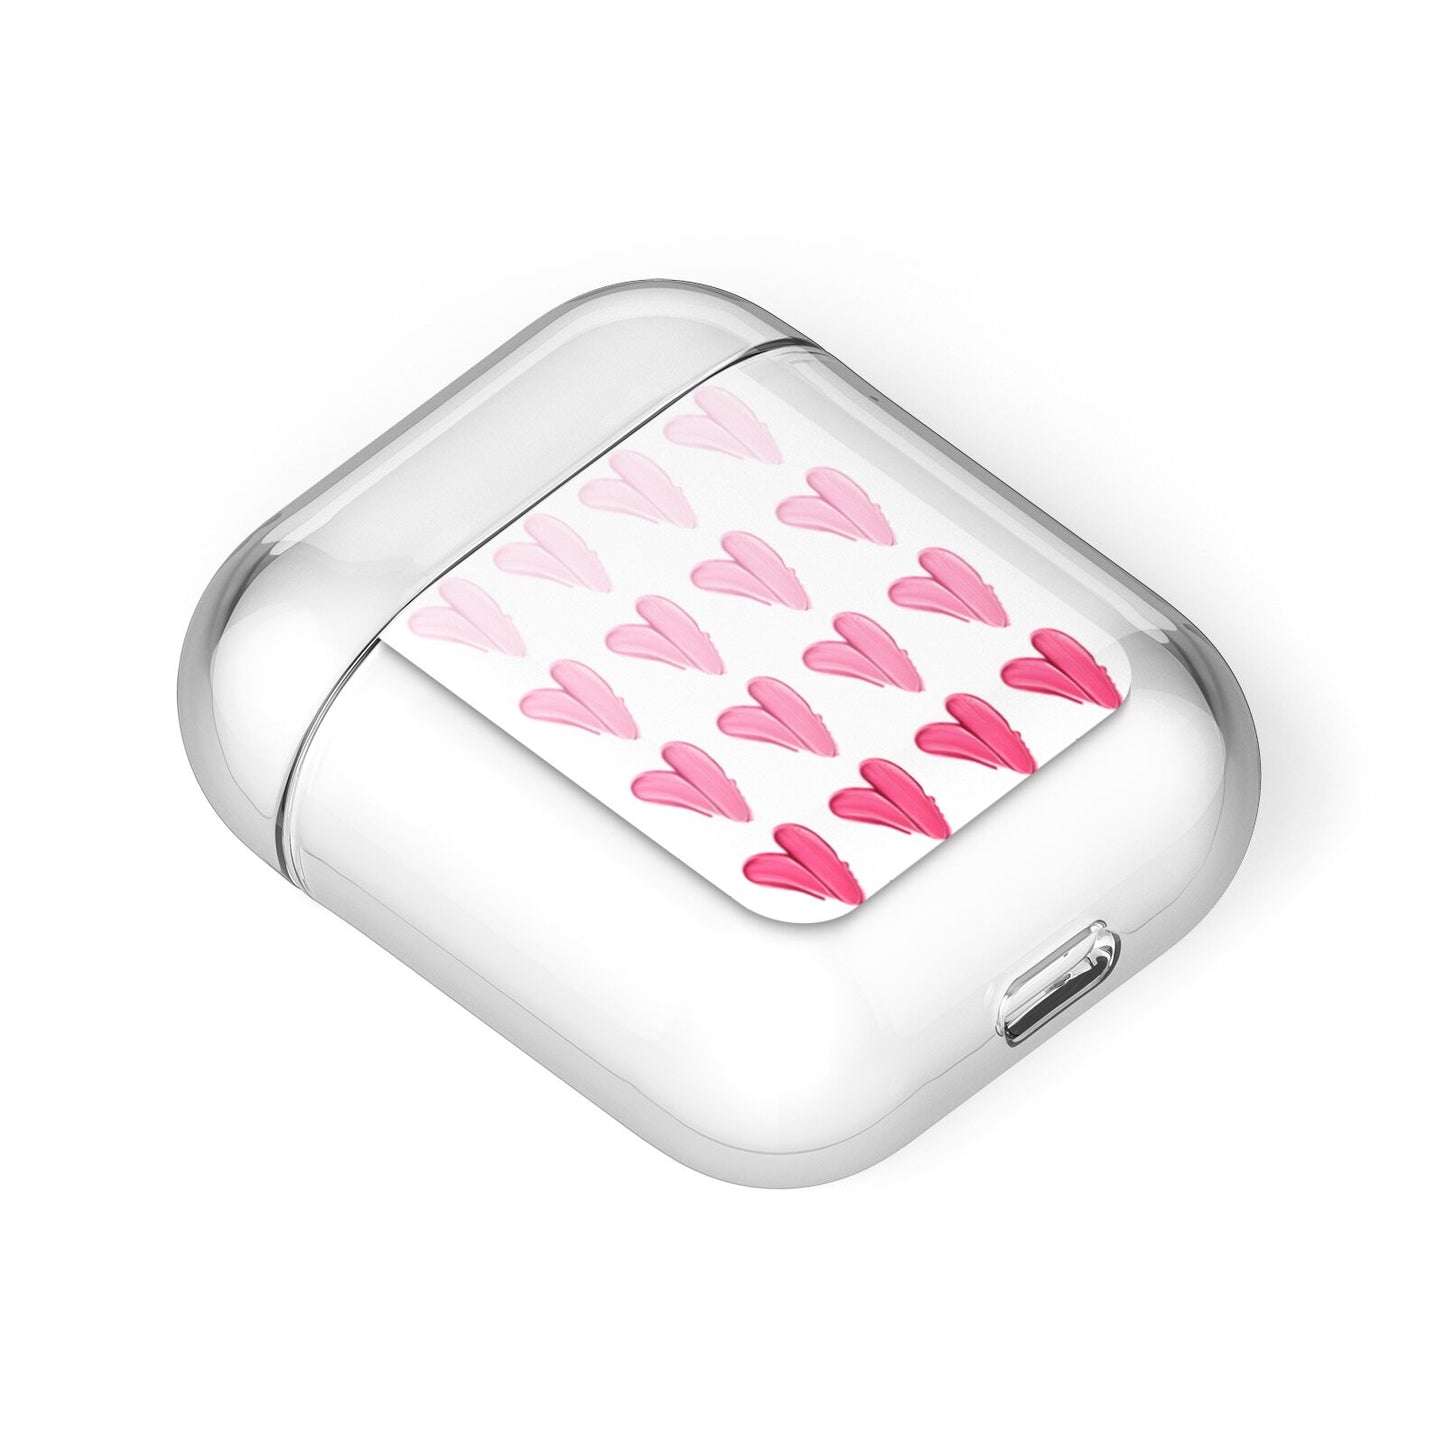 Brushstroke Heart AirPods Case Laid Flat